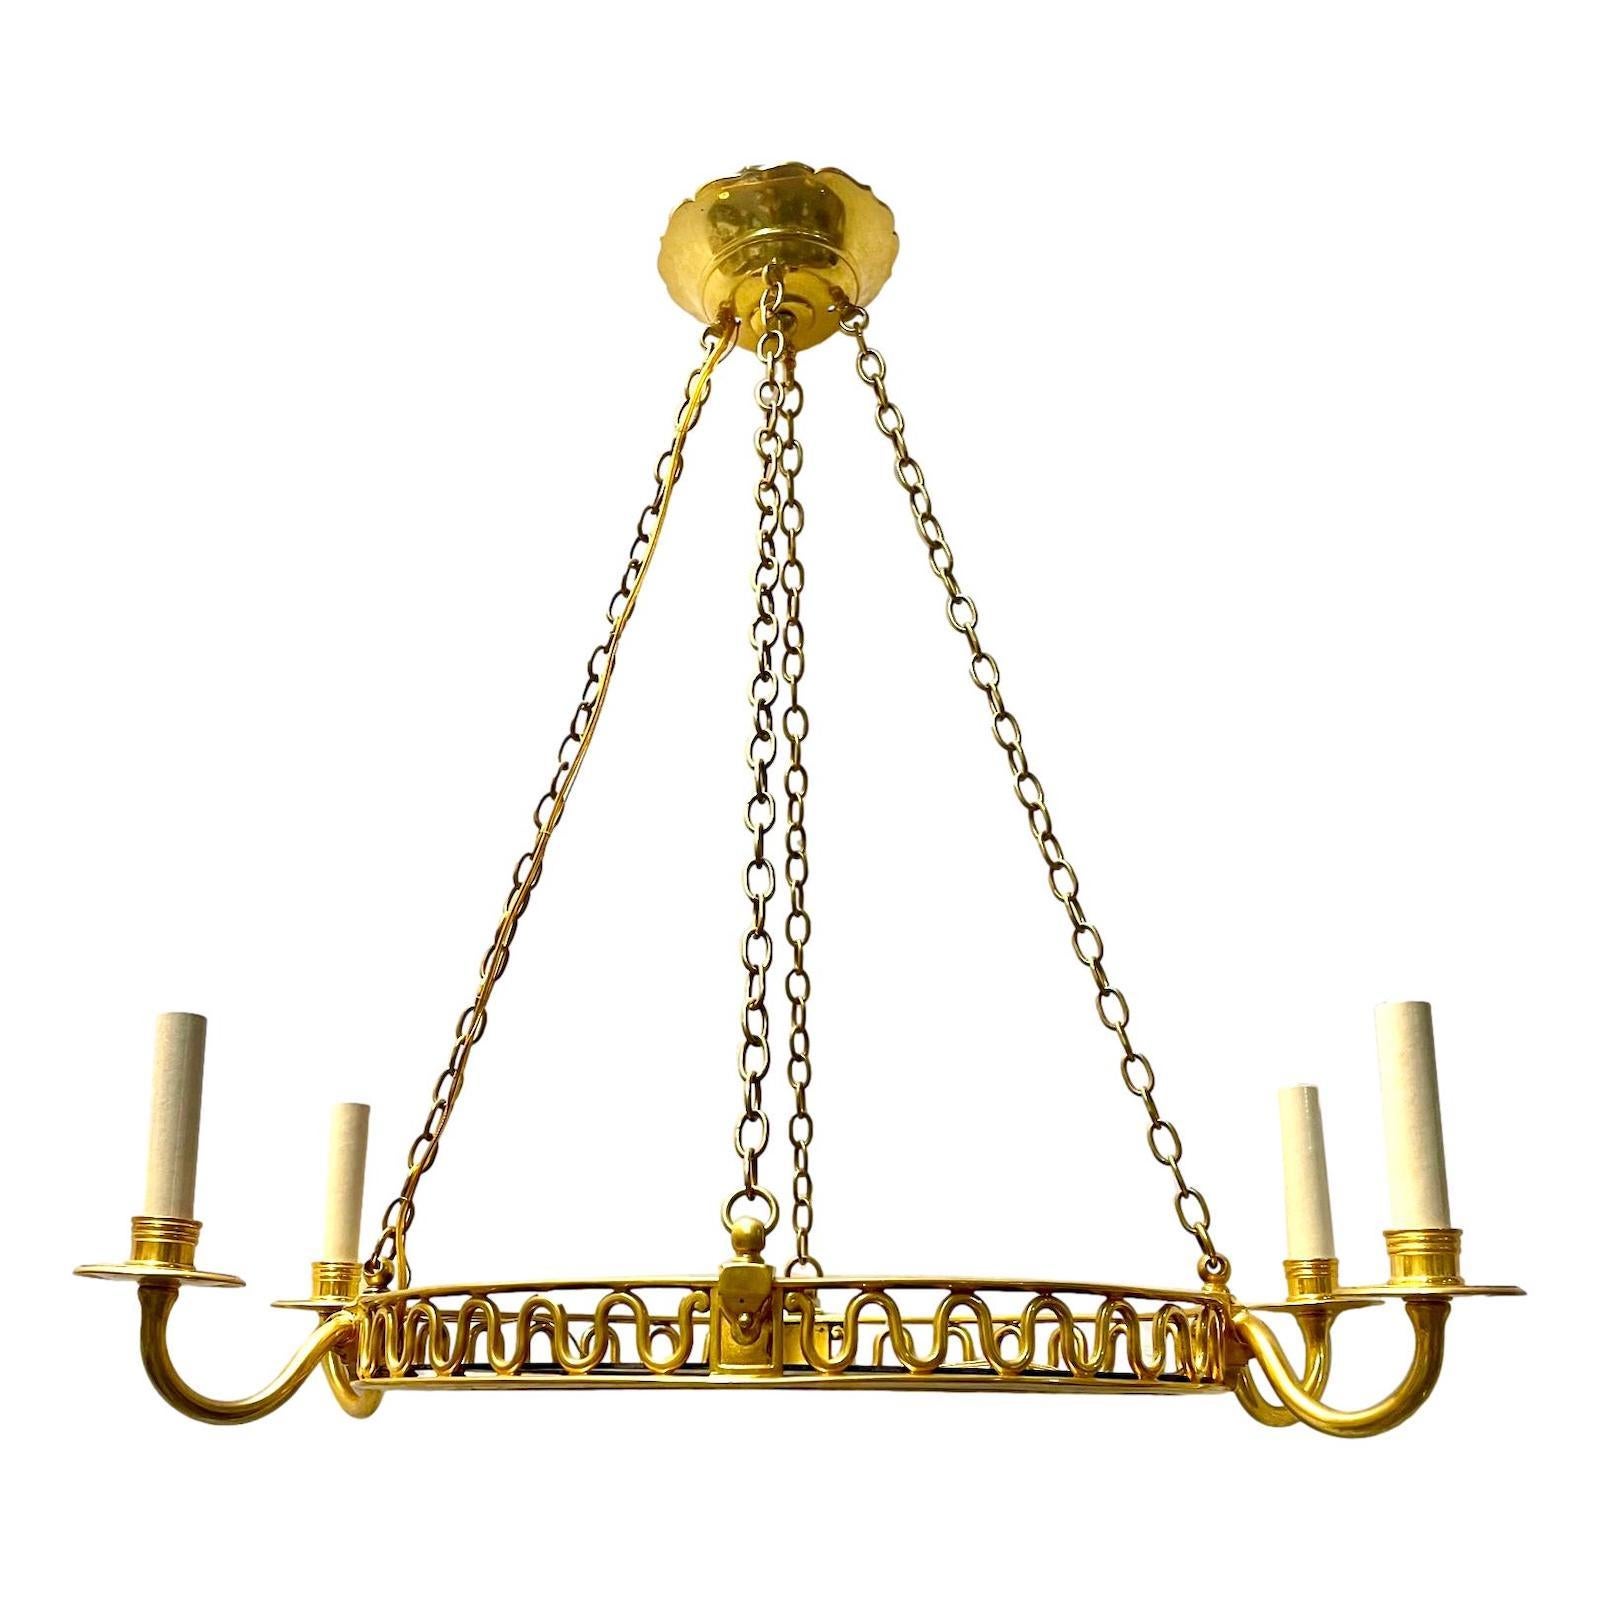 A circa 1950's French gilt chandelier with cobalt blue glass inset.

Measurements:
Drop: 28